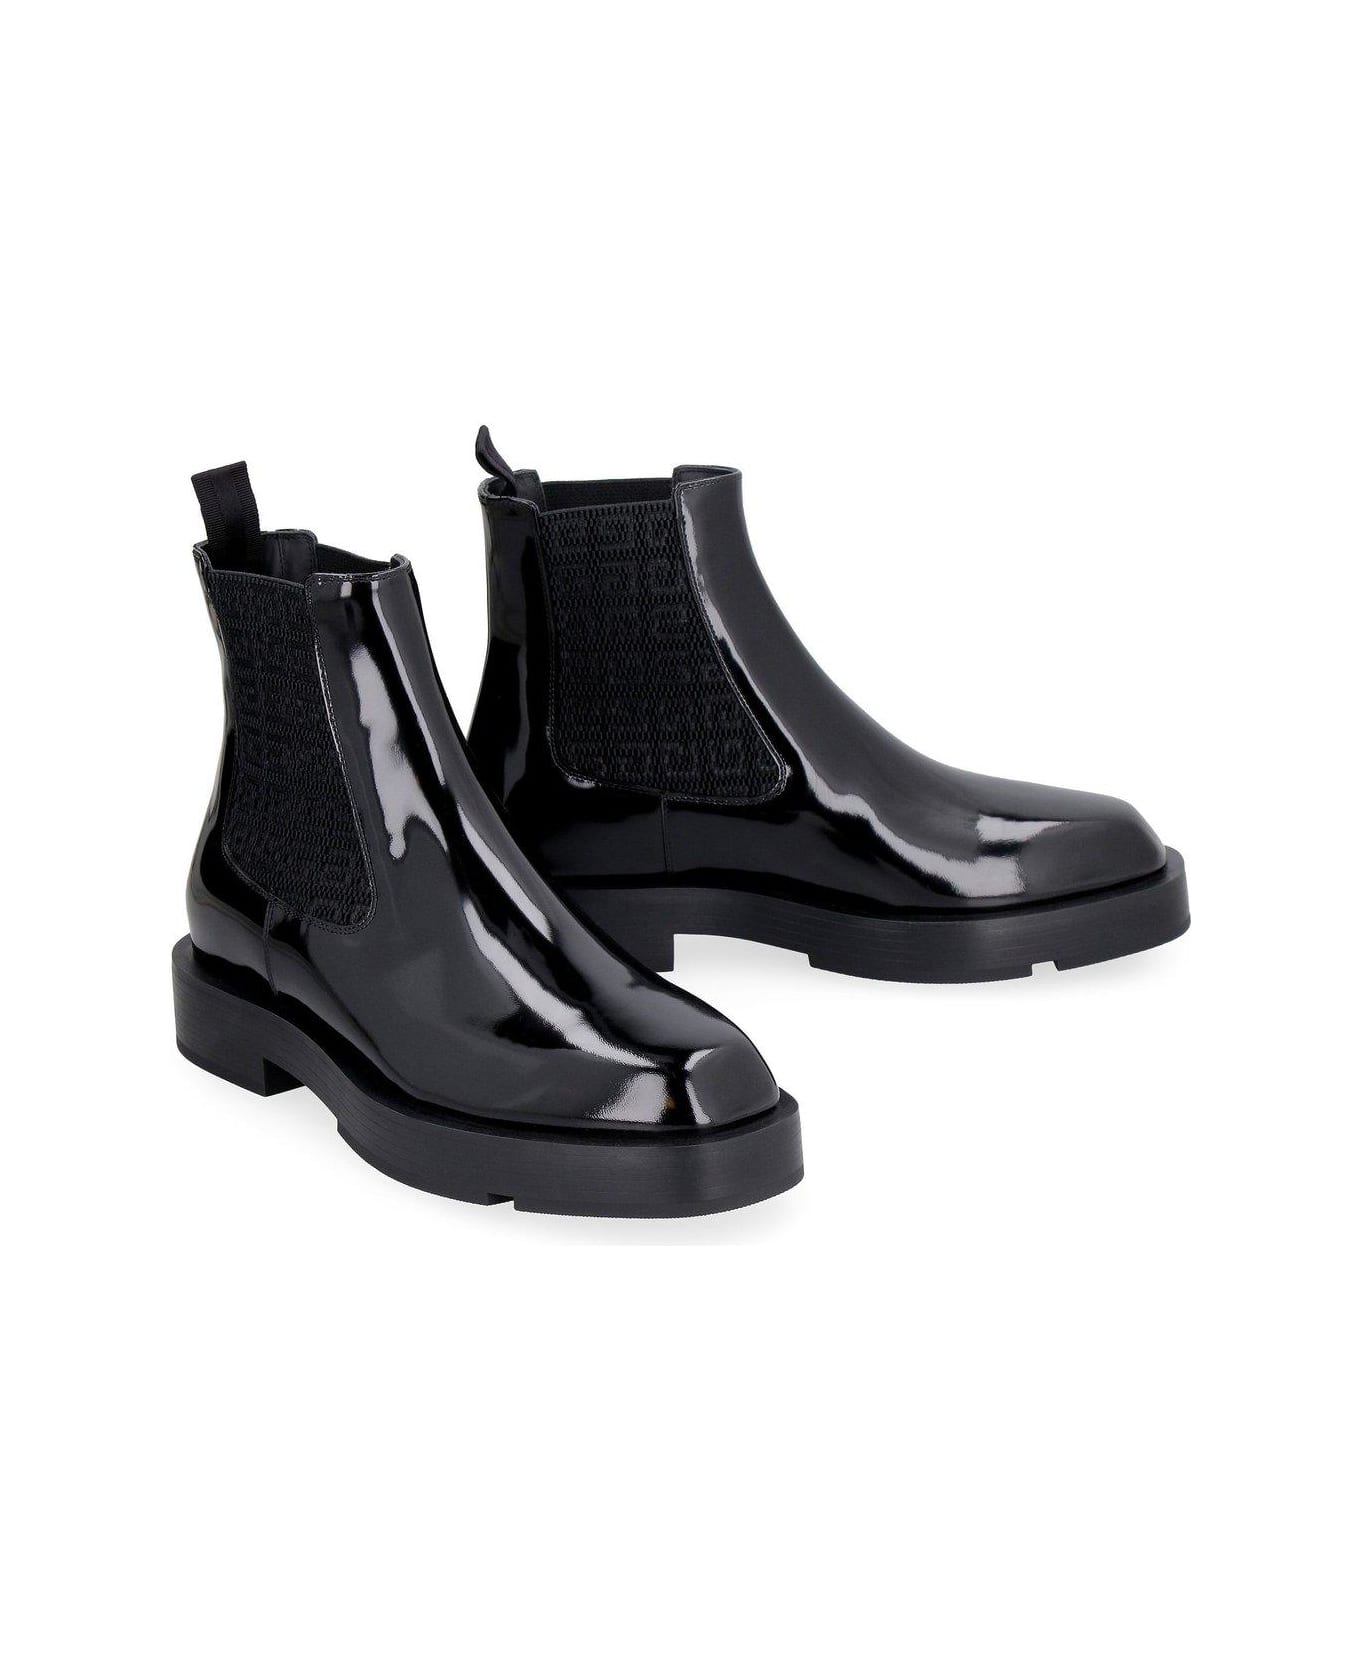 Givenchy Round Toe Ankle Boots - BLACK